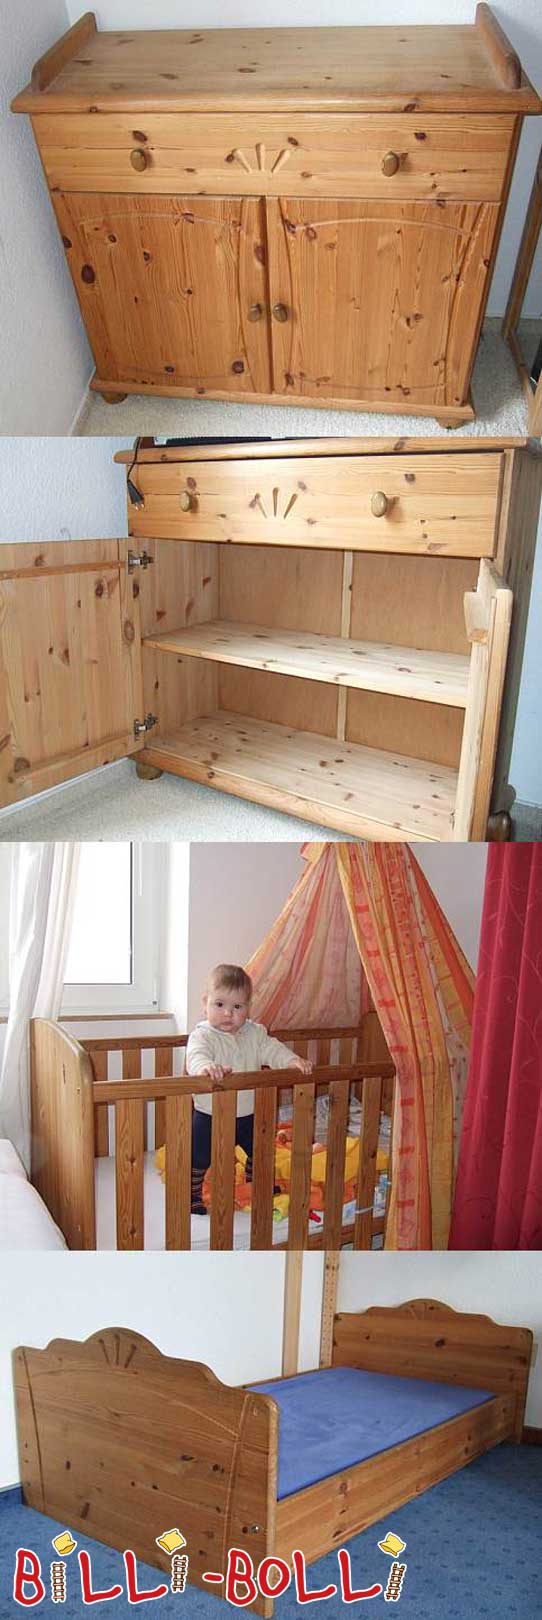 Cots and matching changing table (Category: second hand kids’ furniture)